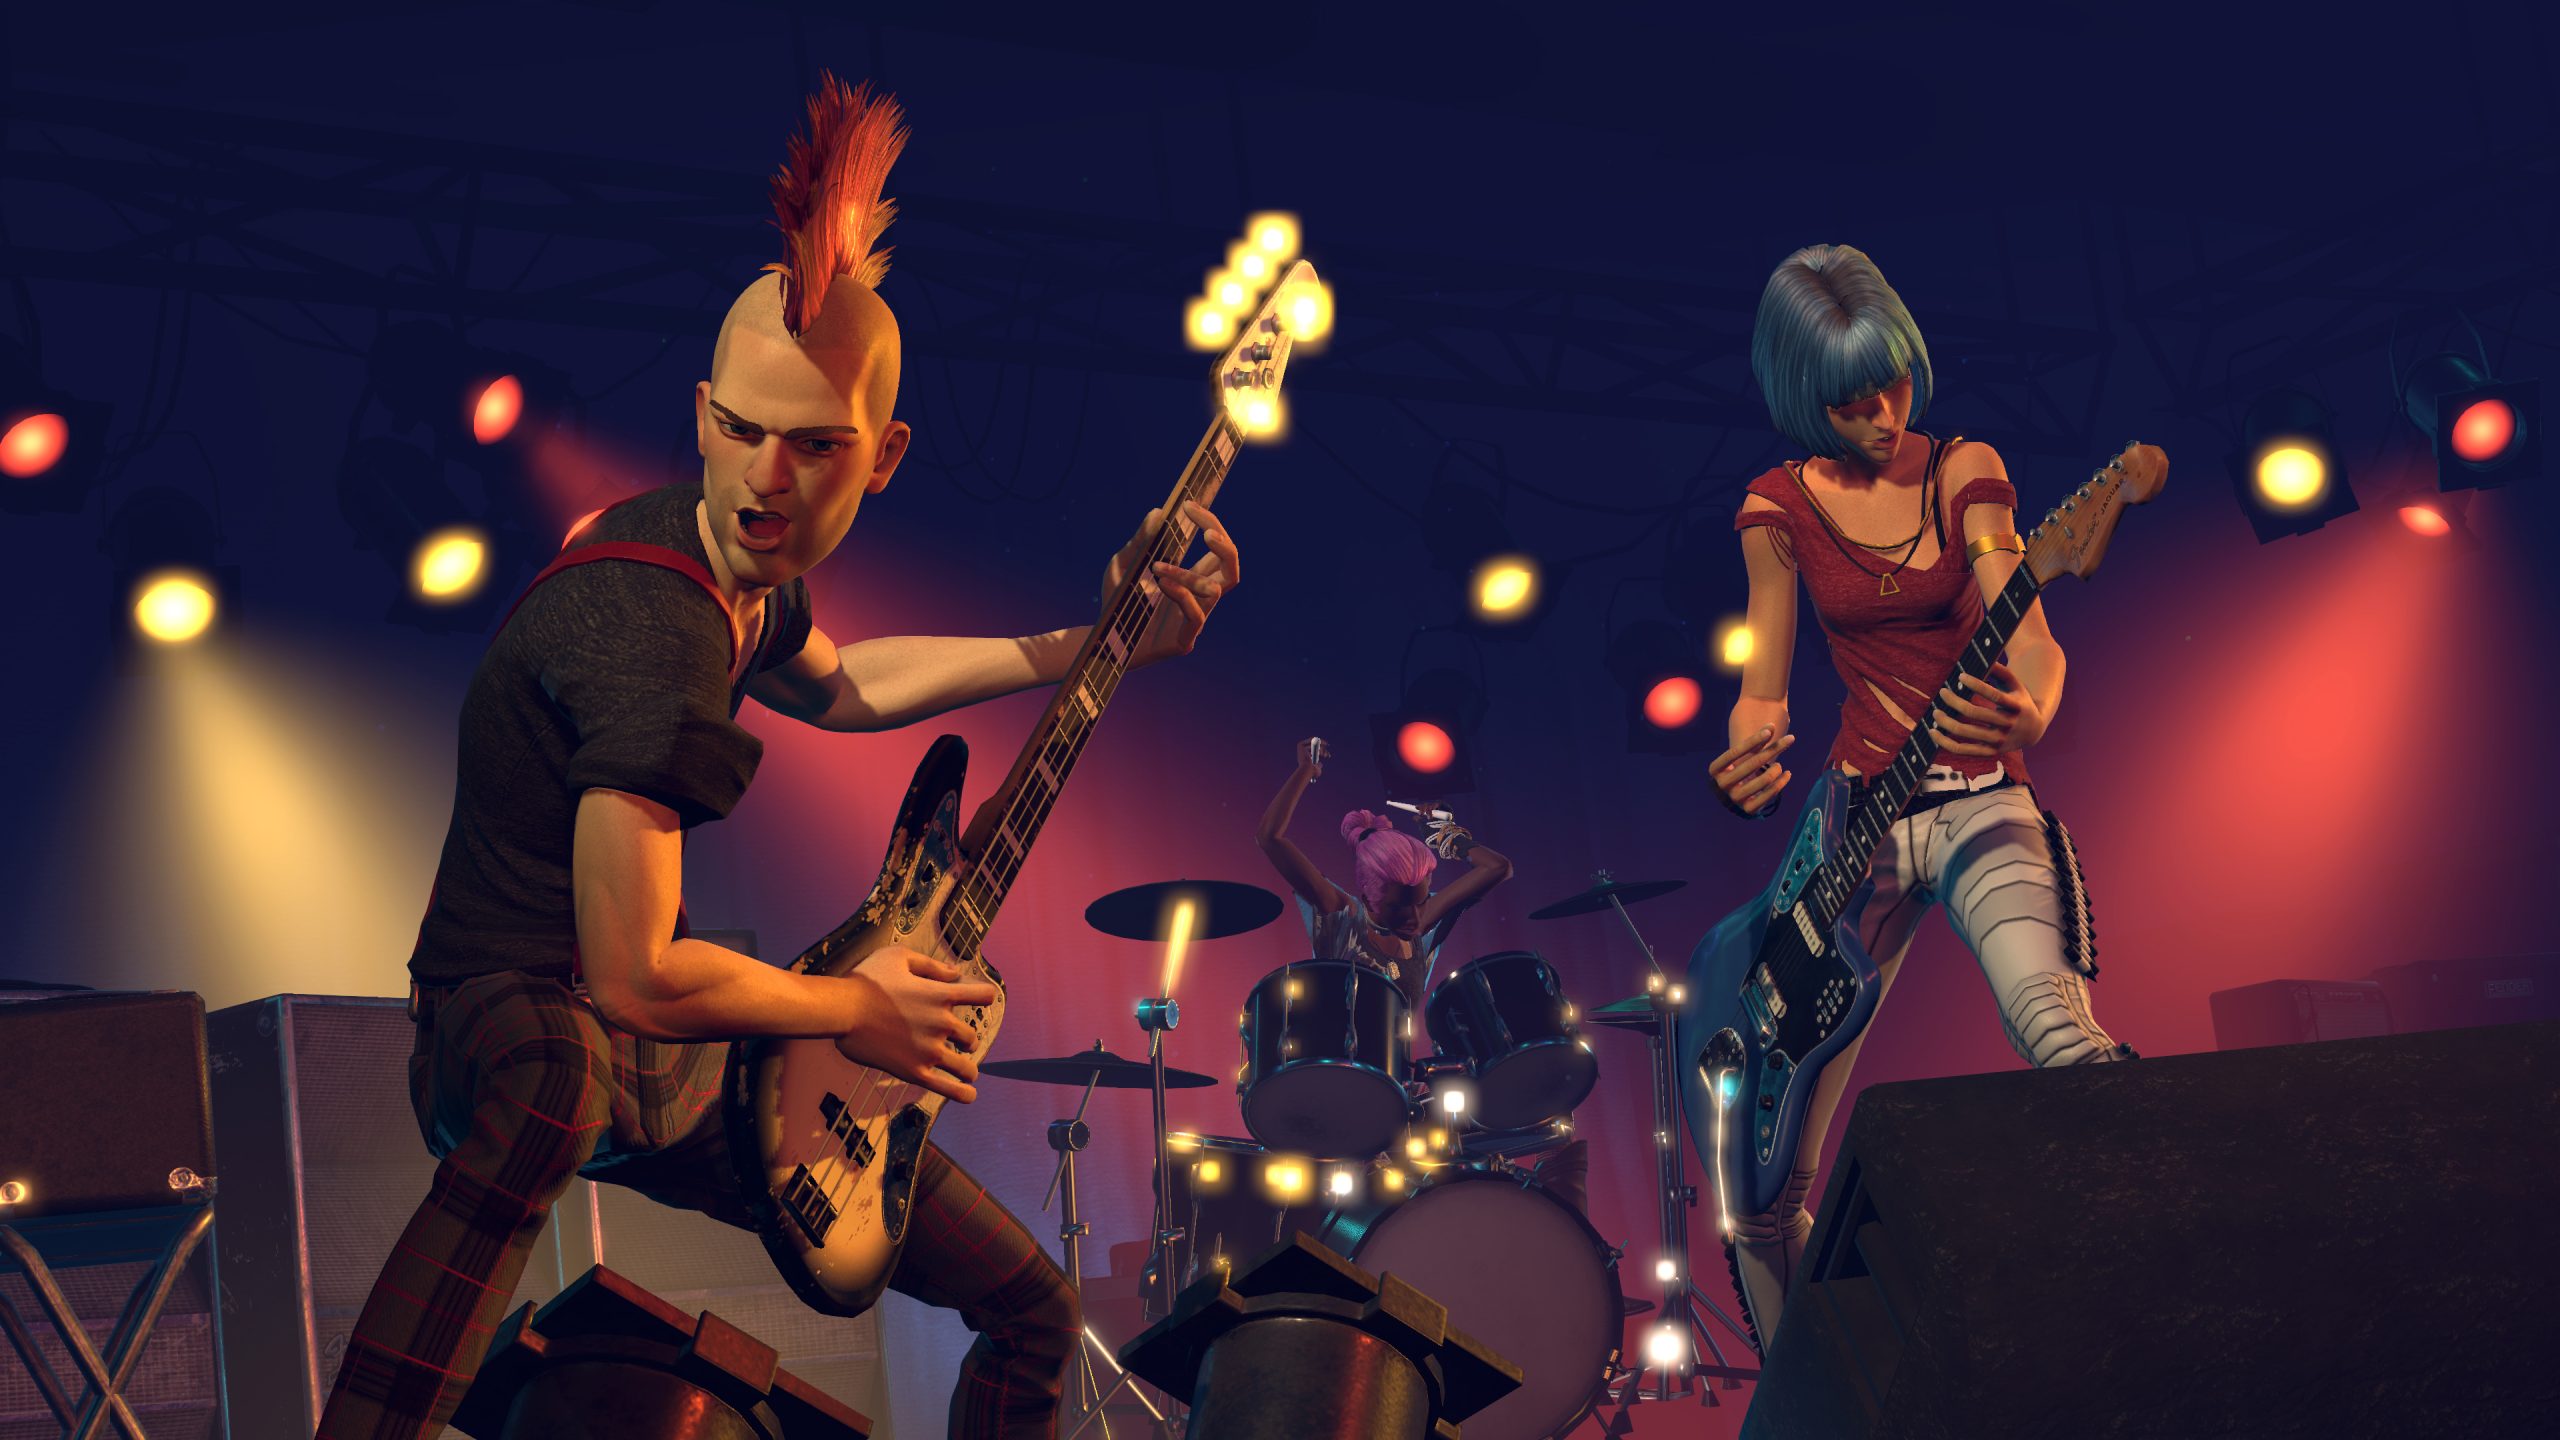 The End of an Era: Harmonix Announces End of DLC Support for Rock Band 4